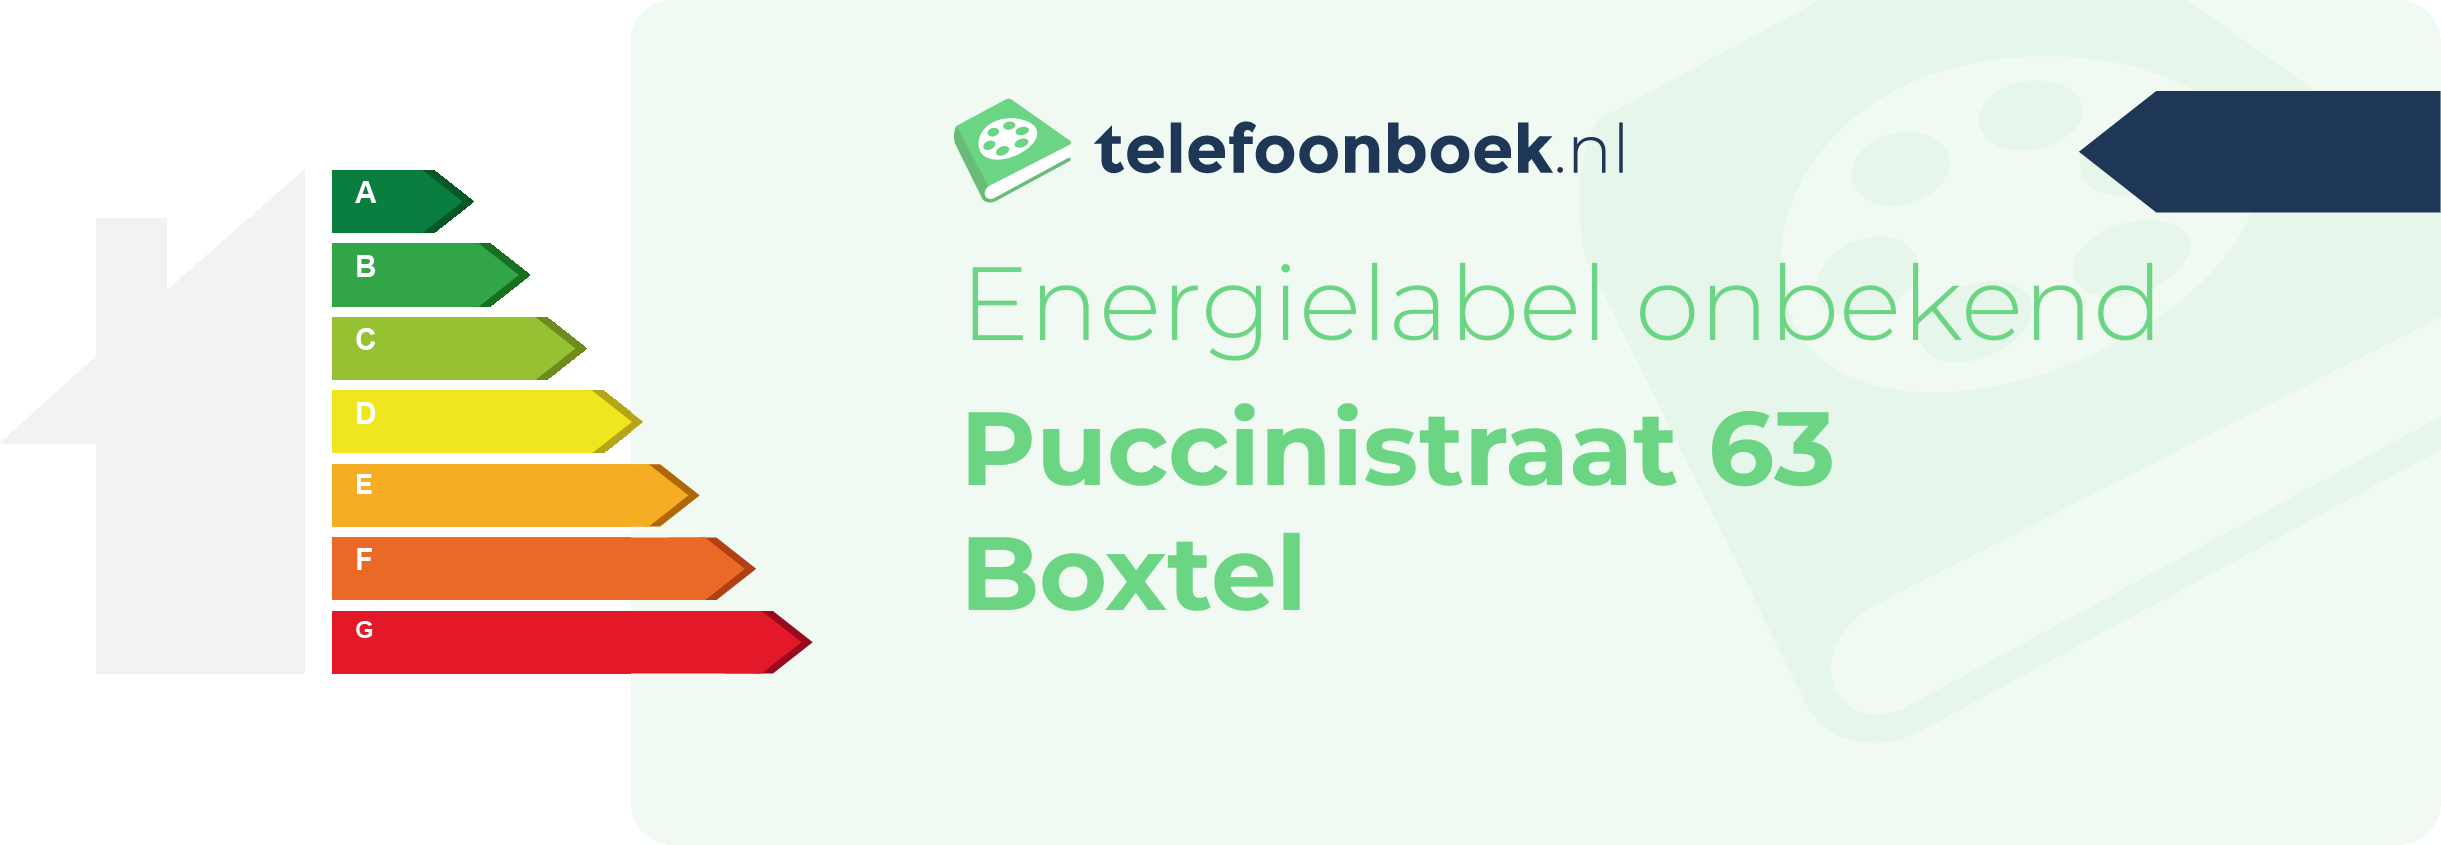 Energielabel Puccinistraat 63 Boxtel